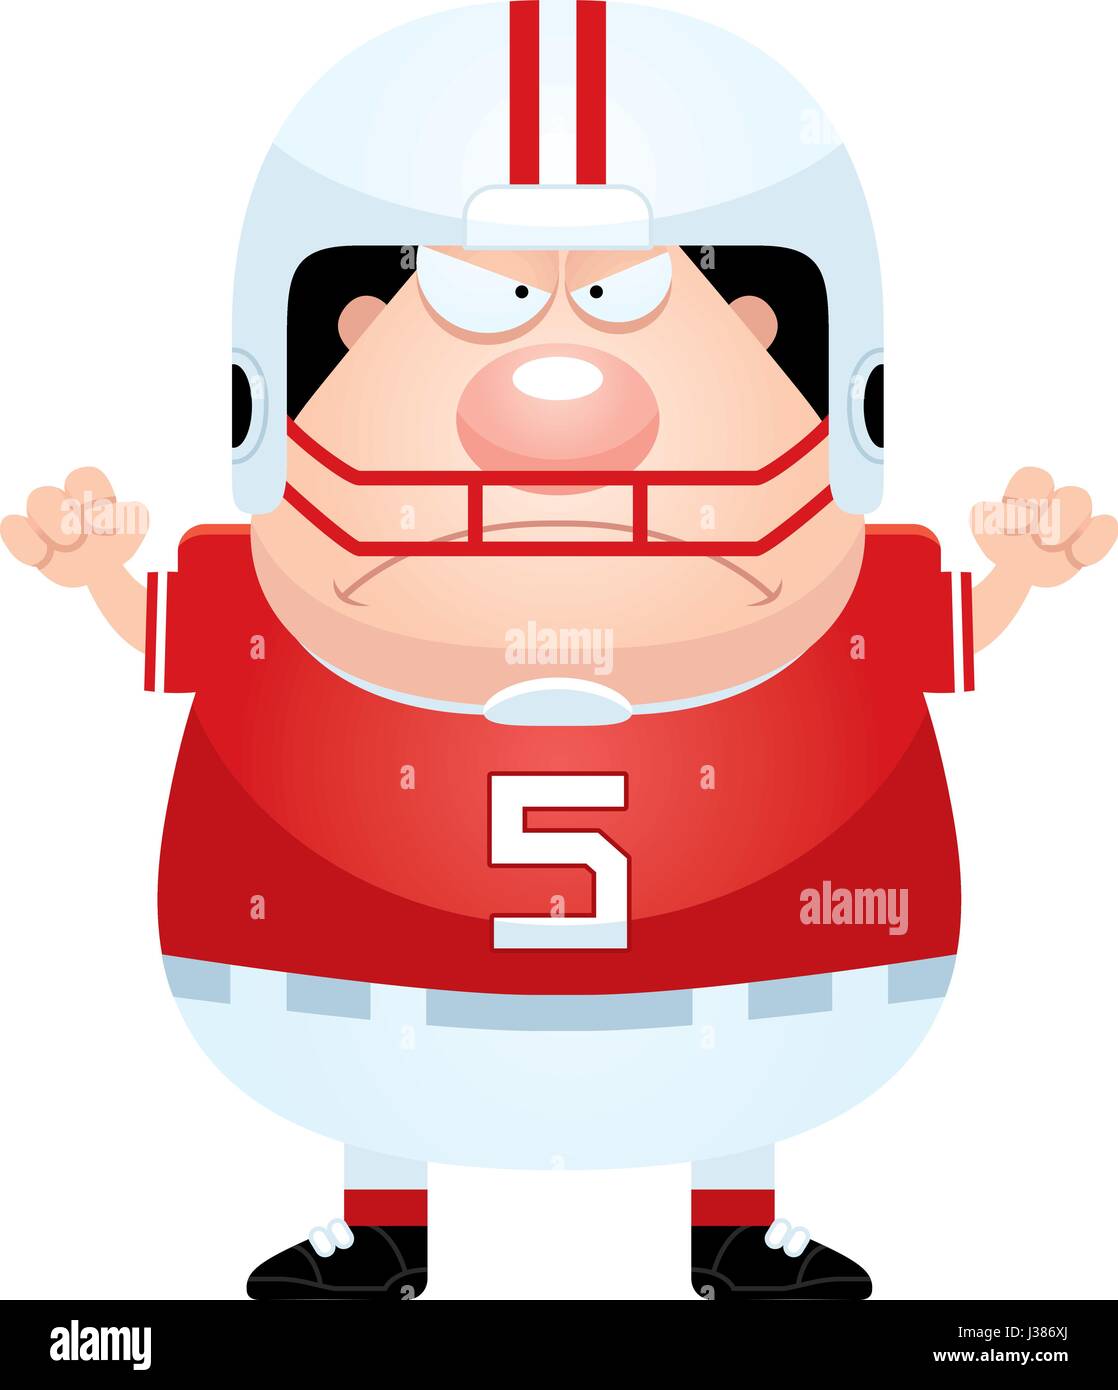 A cartoon illustration of a football player looking angry. Stock Vector